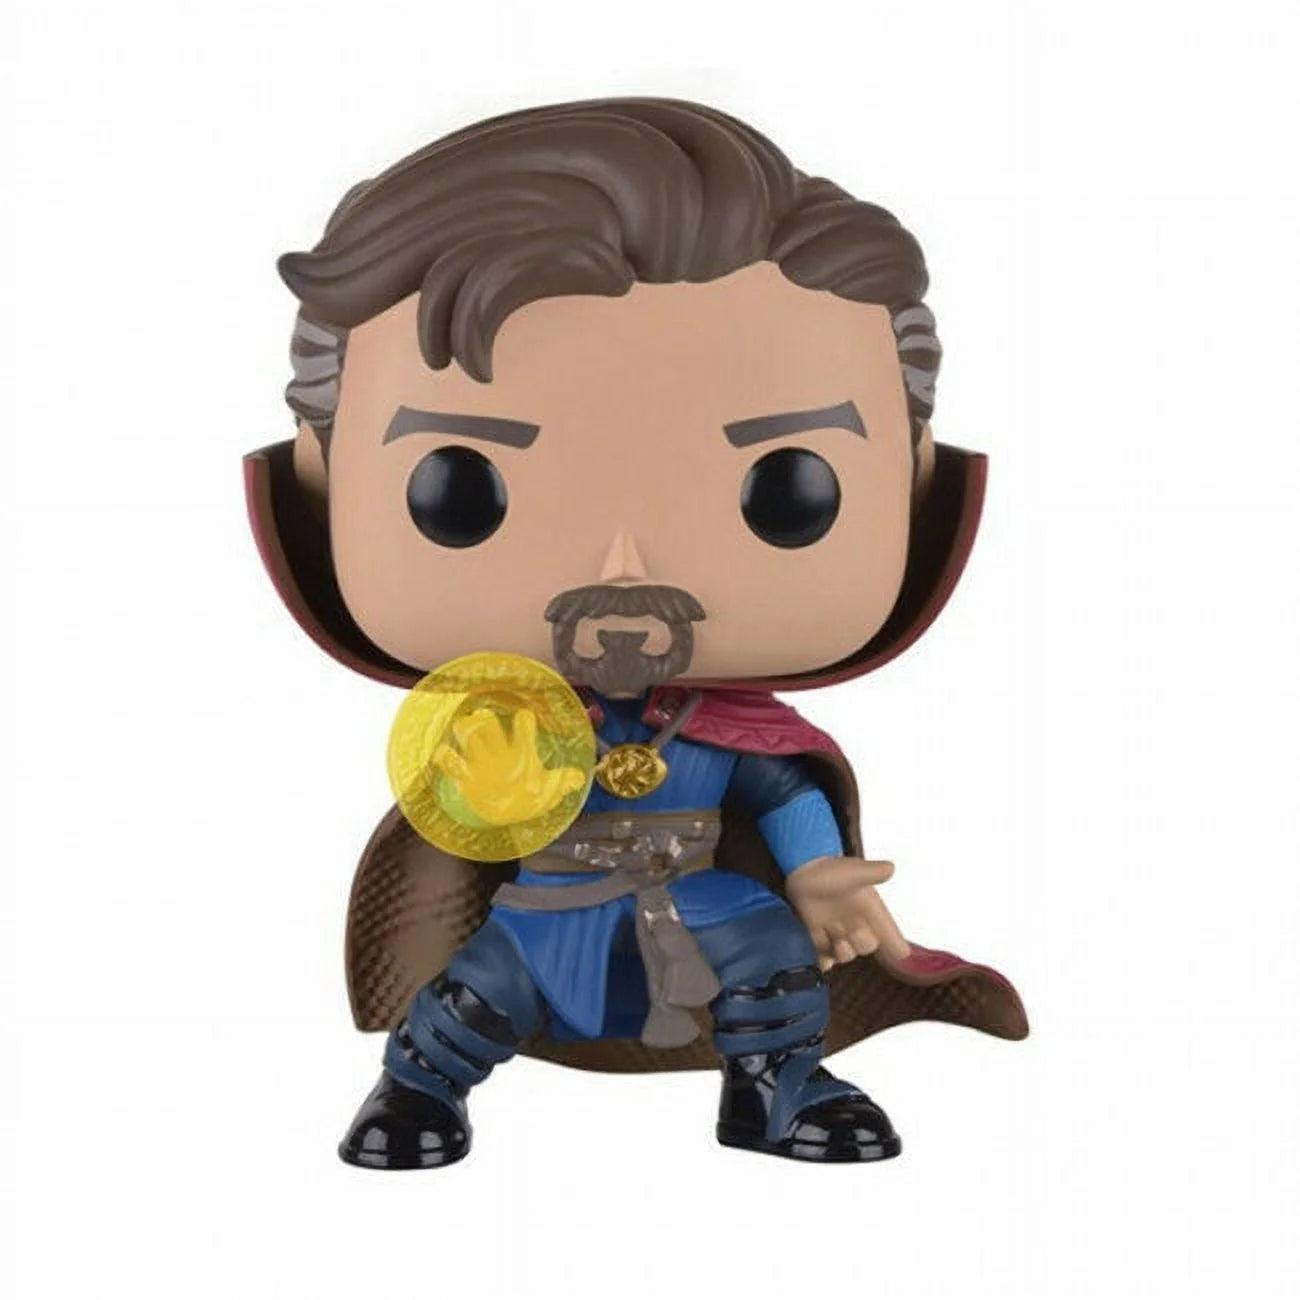 Pop! Marvel - Doctor Strange - #161 - 2016 San Diego Comic Con LIMITED Edition EXCLUSIVE - Hobby Champion Inc